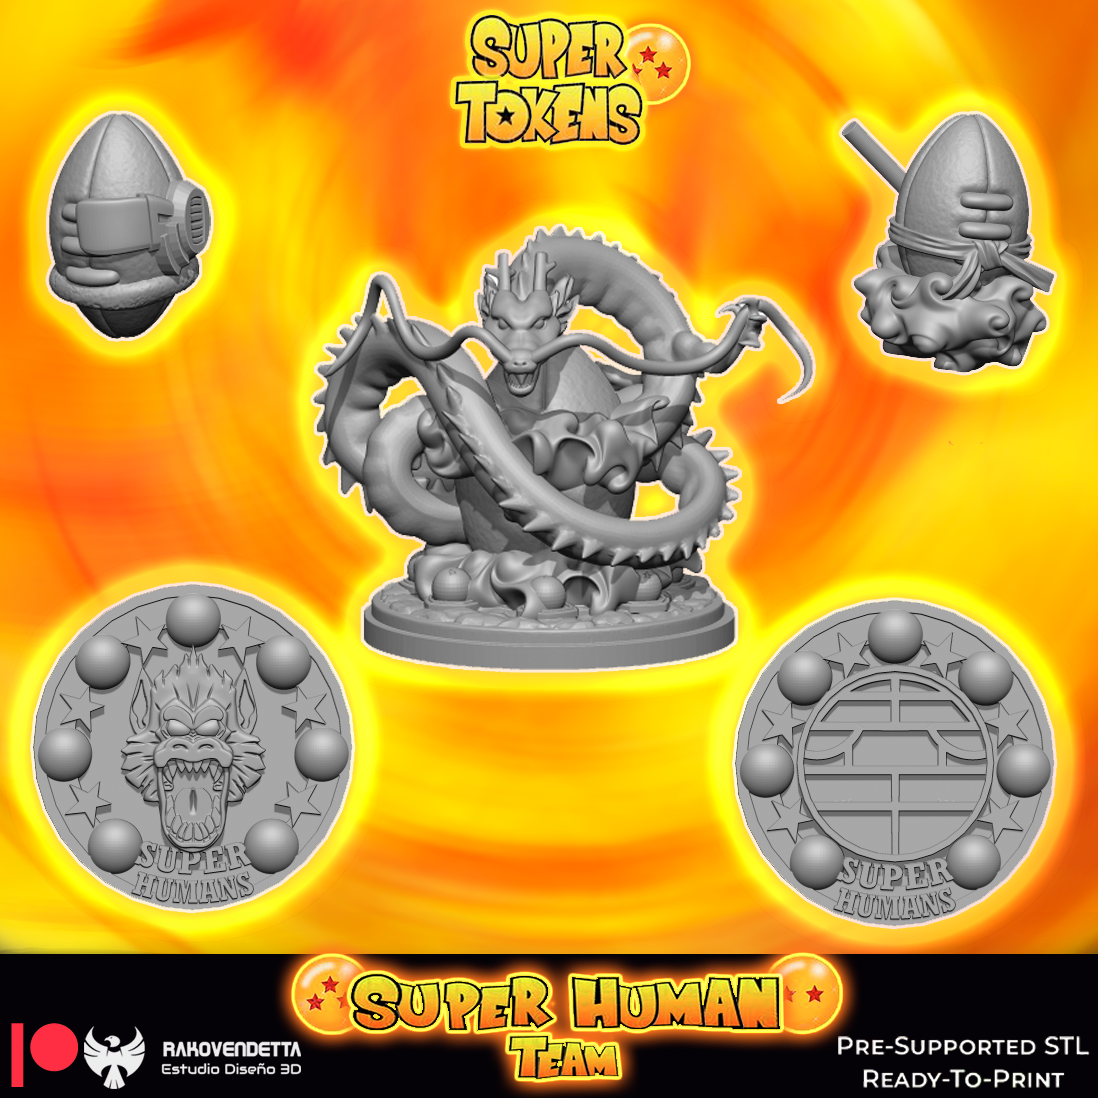 Super Human Fantasy Football Team Tokens by Rako Vendetta Miniatures for Tabletop Games, Dioramas and Statues